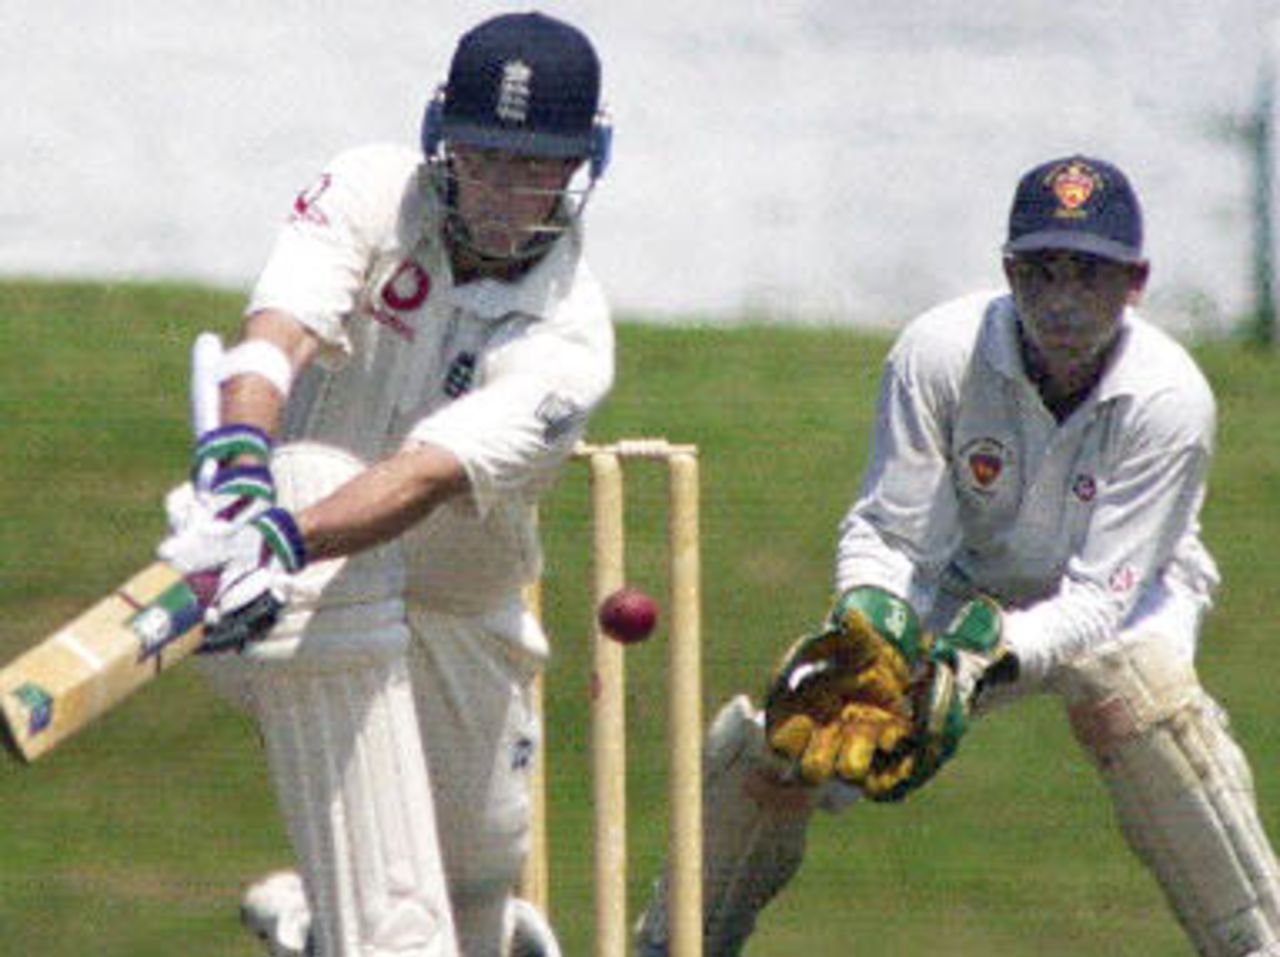 English opener Marcus Trescothick in action 05 February 2001 in the first day of the first practice match against a Sri Lankan board president's eleven as wicket keeper Malintha Perera looks on. England is due to play three tests and three one-day internationals against the home team in their first tour of Sri Lanka in eight years.